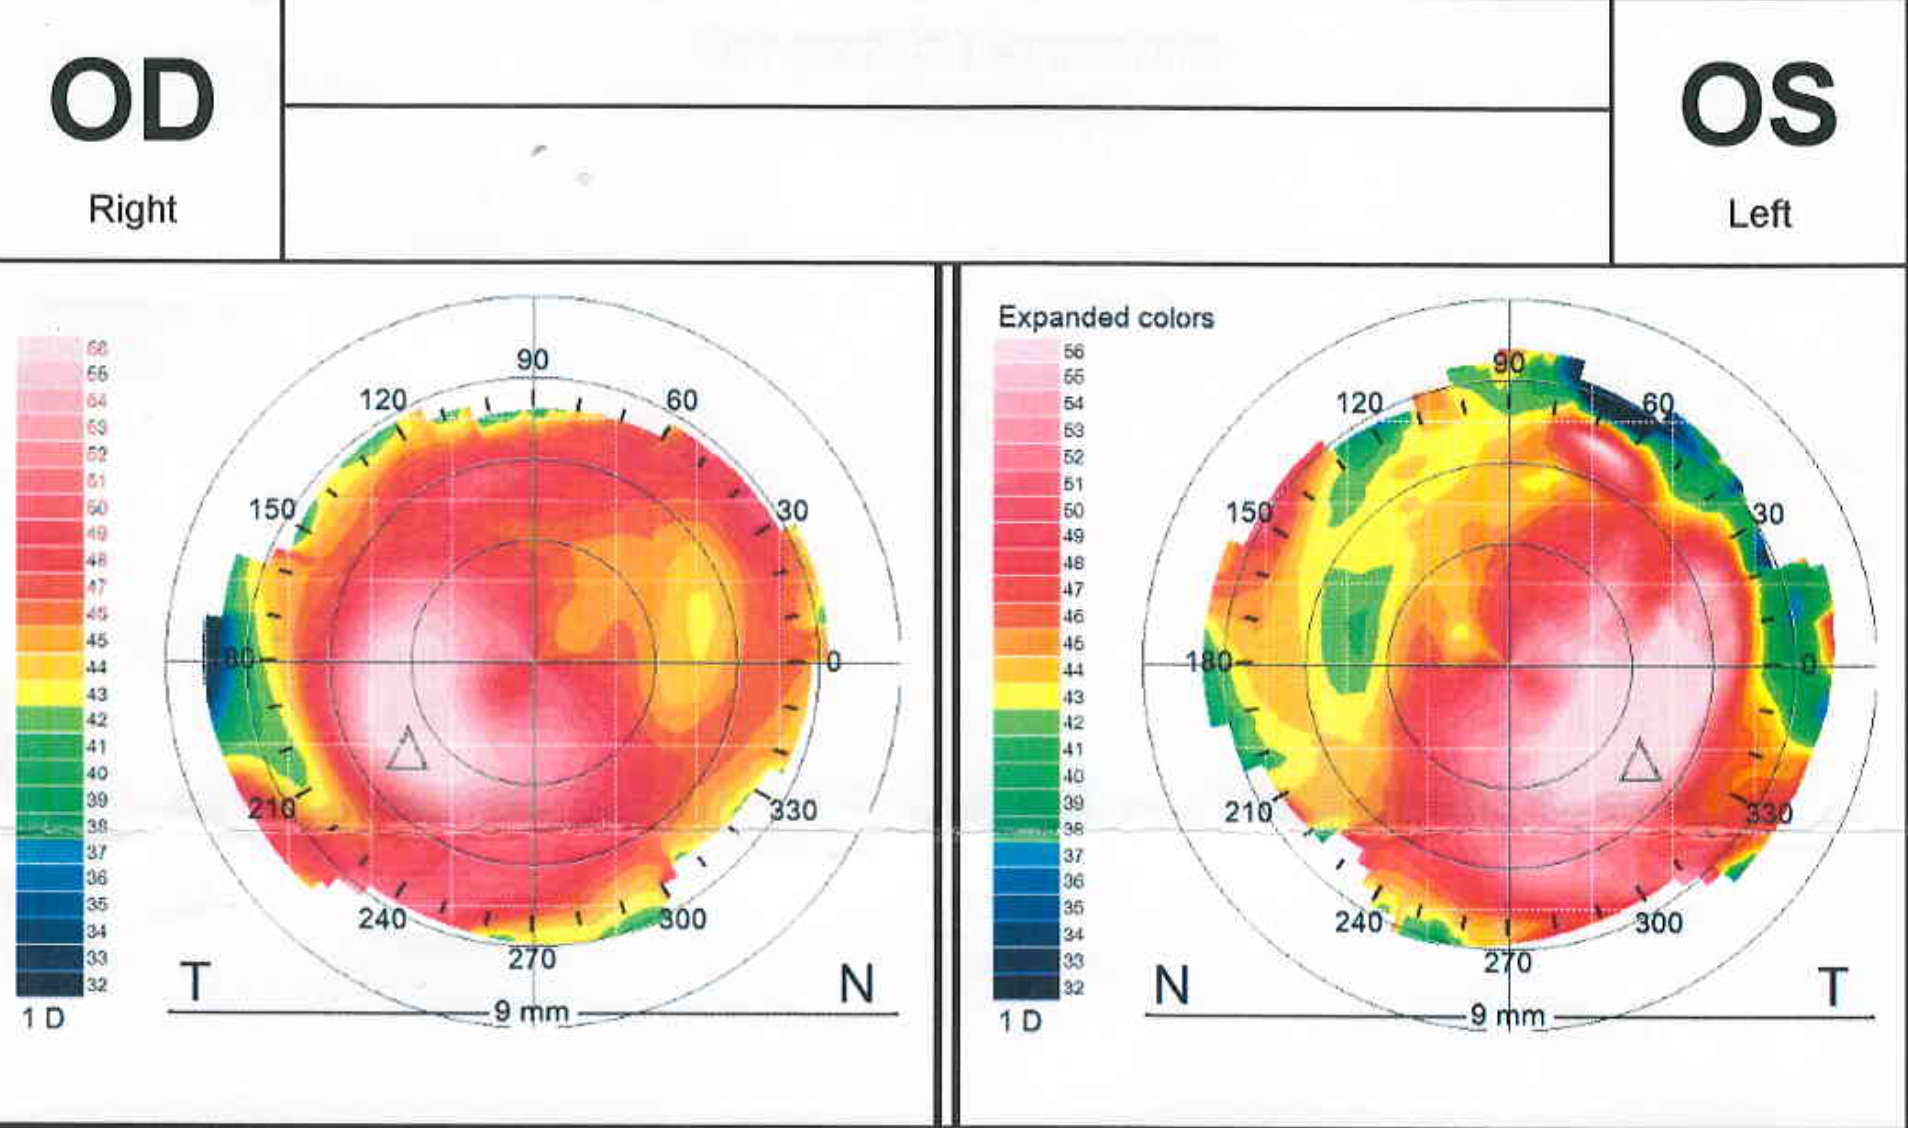 Figure 1. Topography of the keratoconic patient in Case 1.